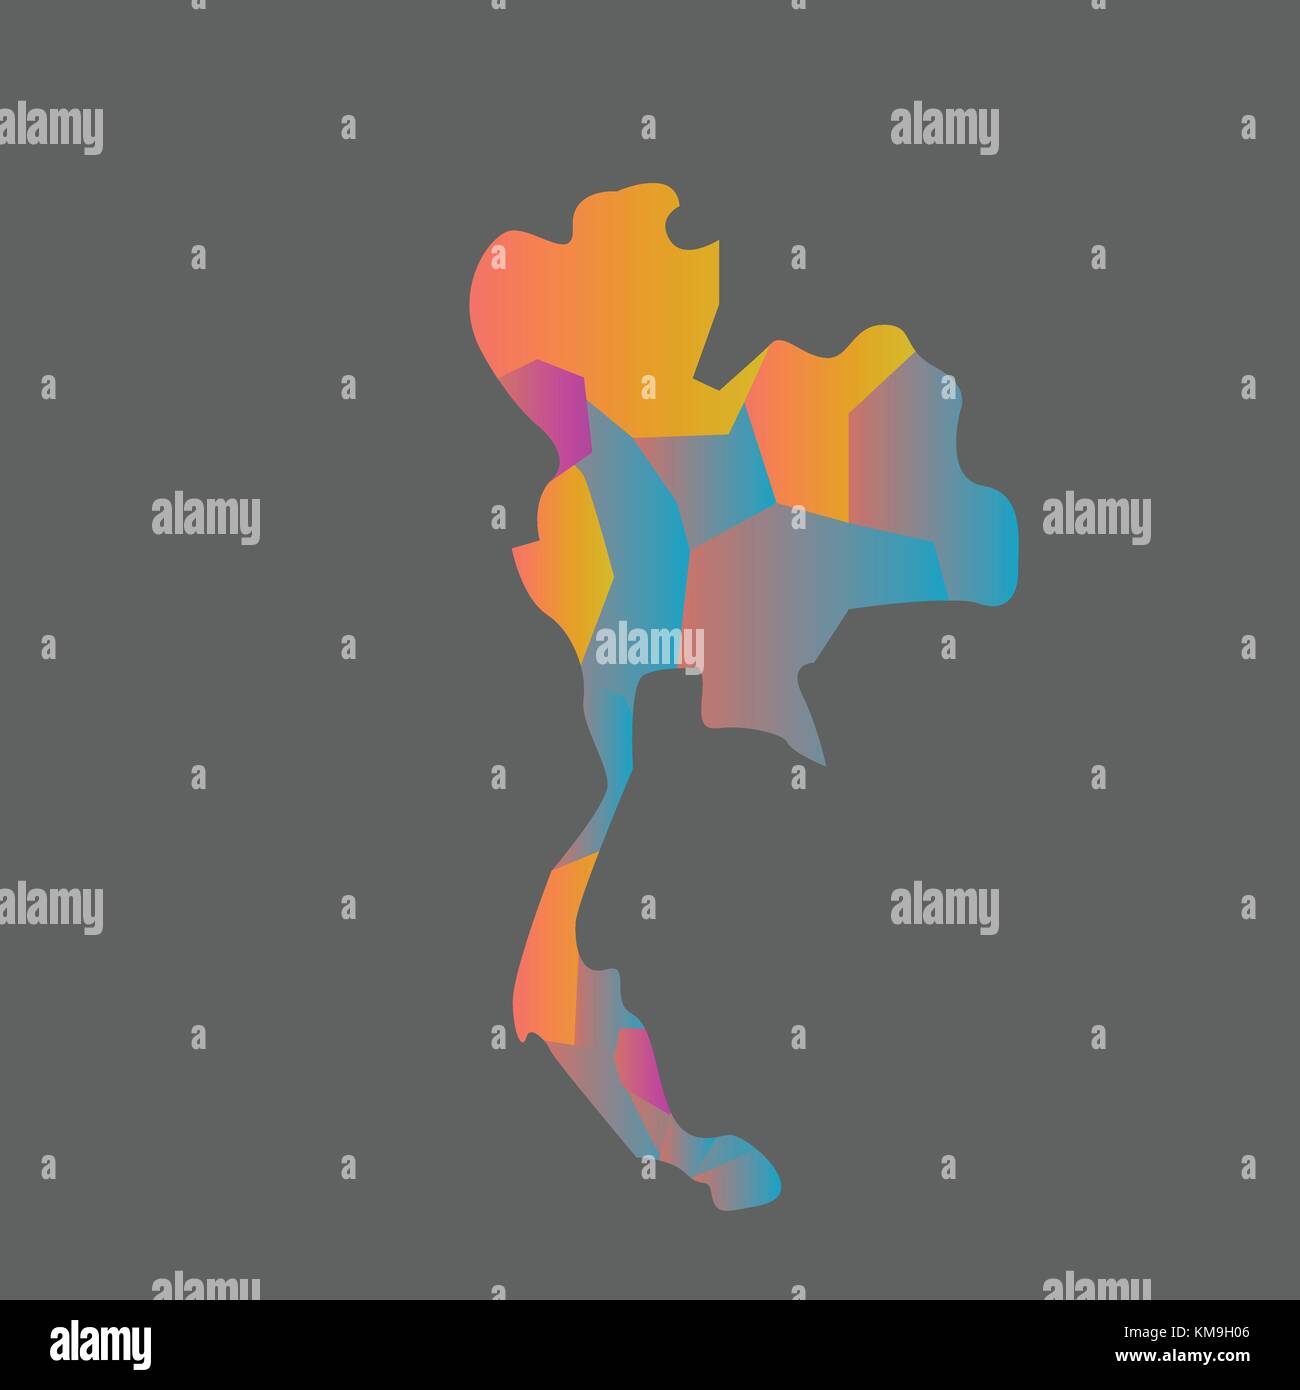 Colorful Thailand map with grey background vector illustration.Abstract Thailand concept. Stock Vector